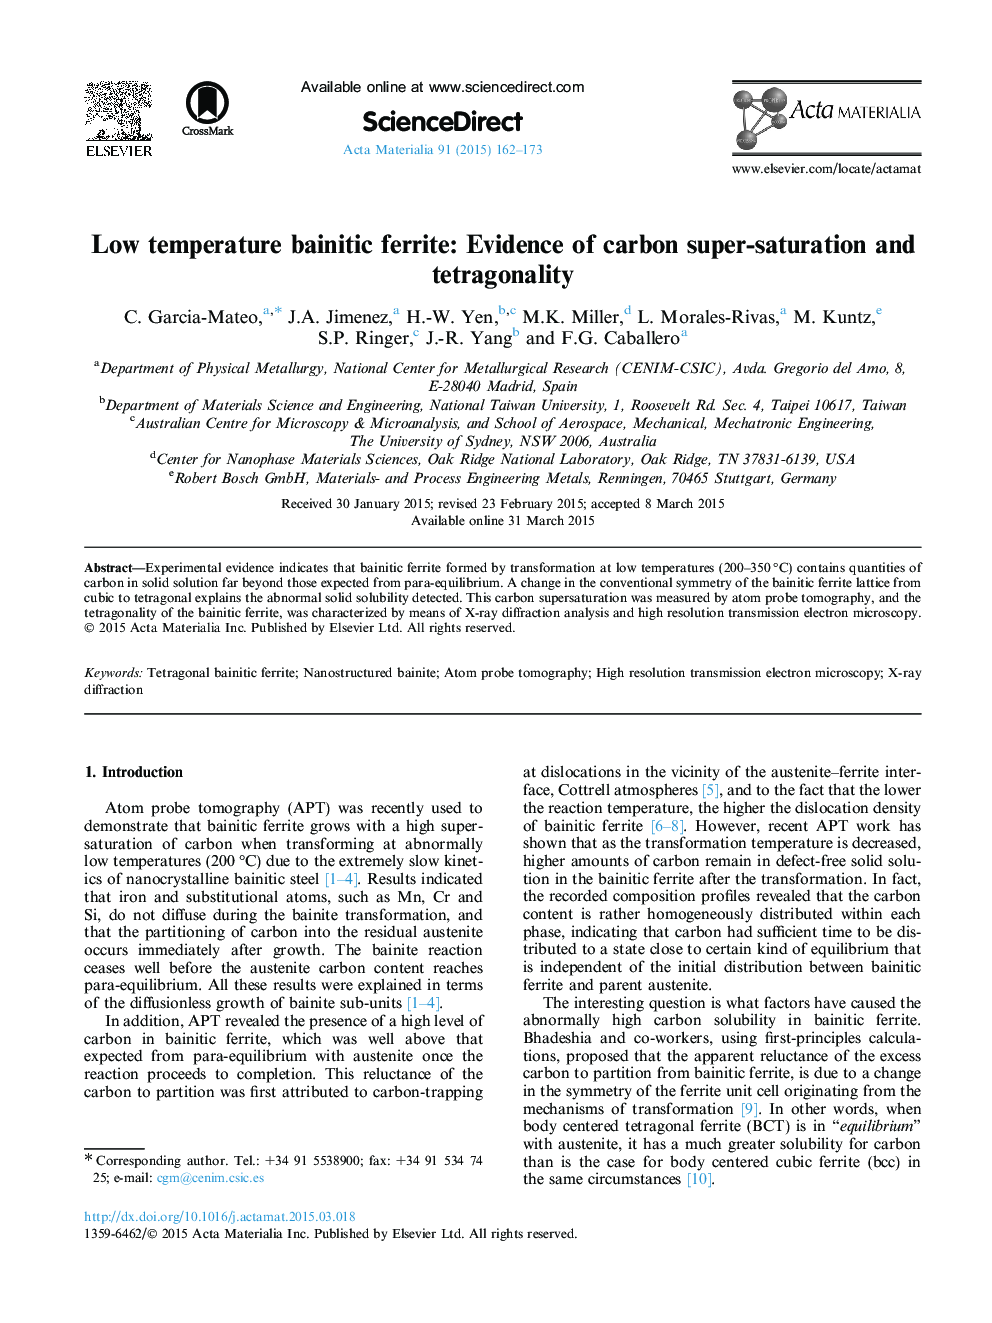 Low temperature bainitic ferrite: Evidence of carbon super-saturation and tetragonality